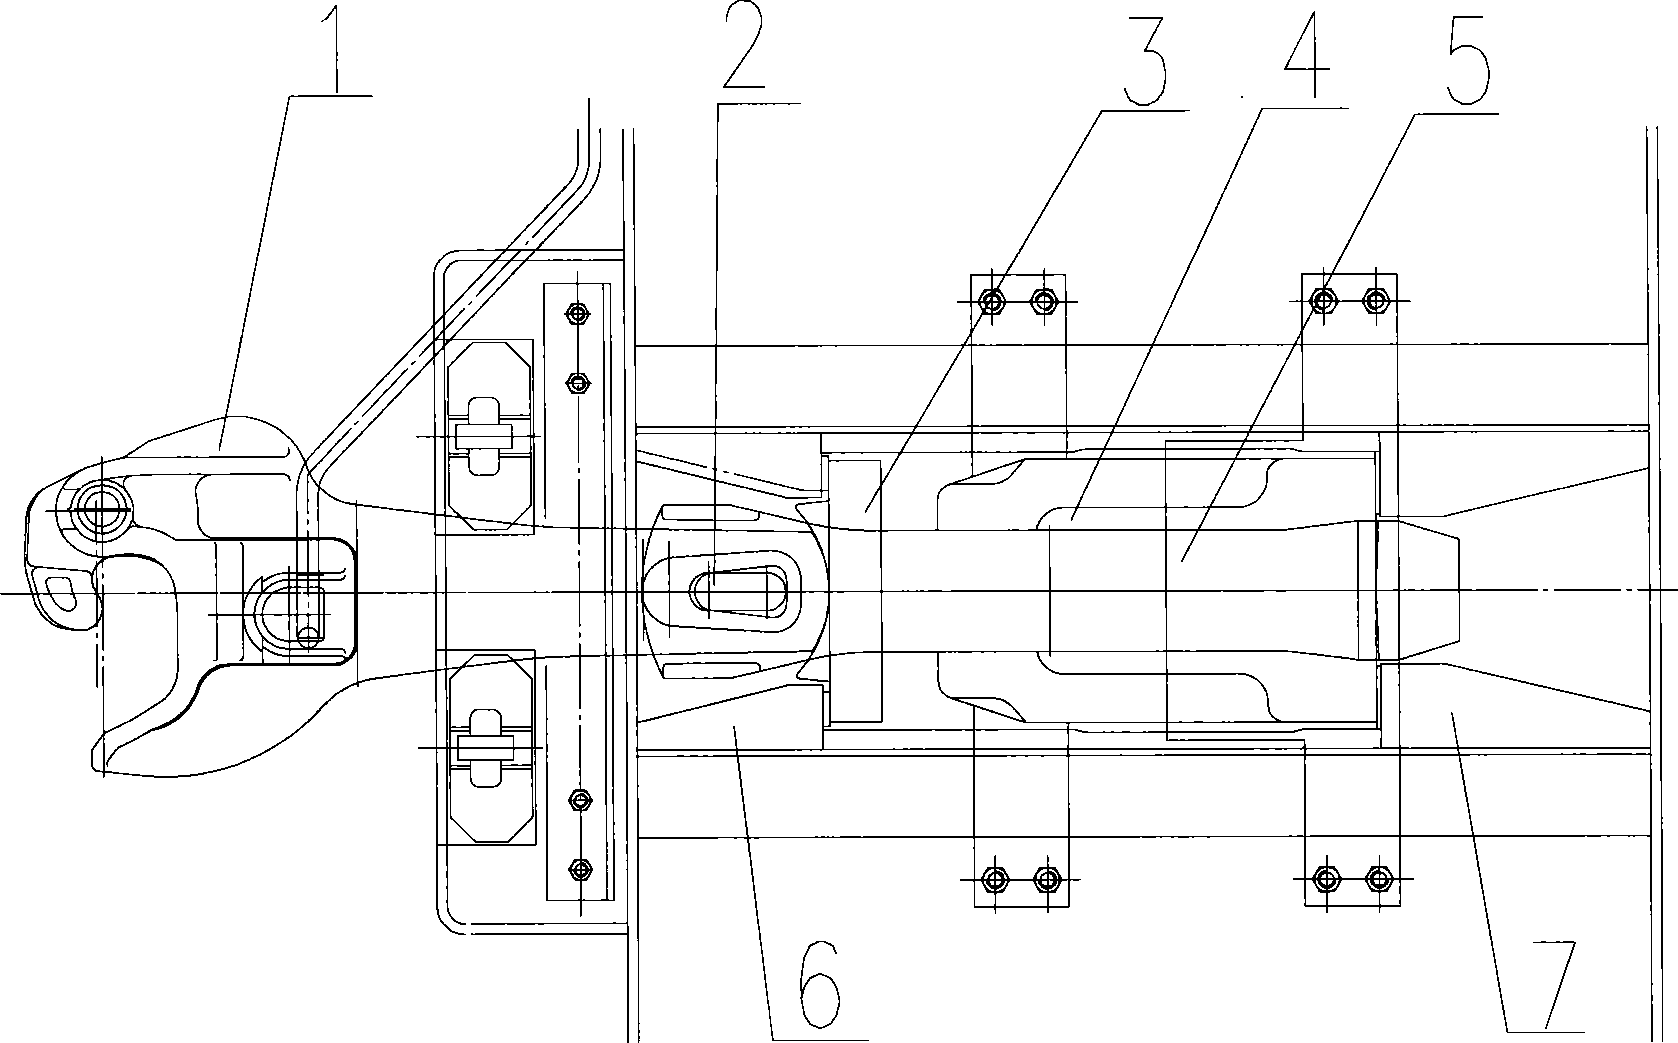 Coupler, slave plate and coupler buffering mechanism